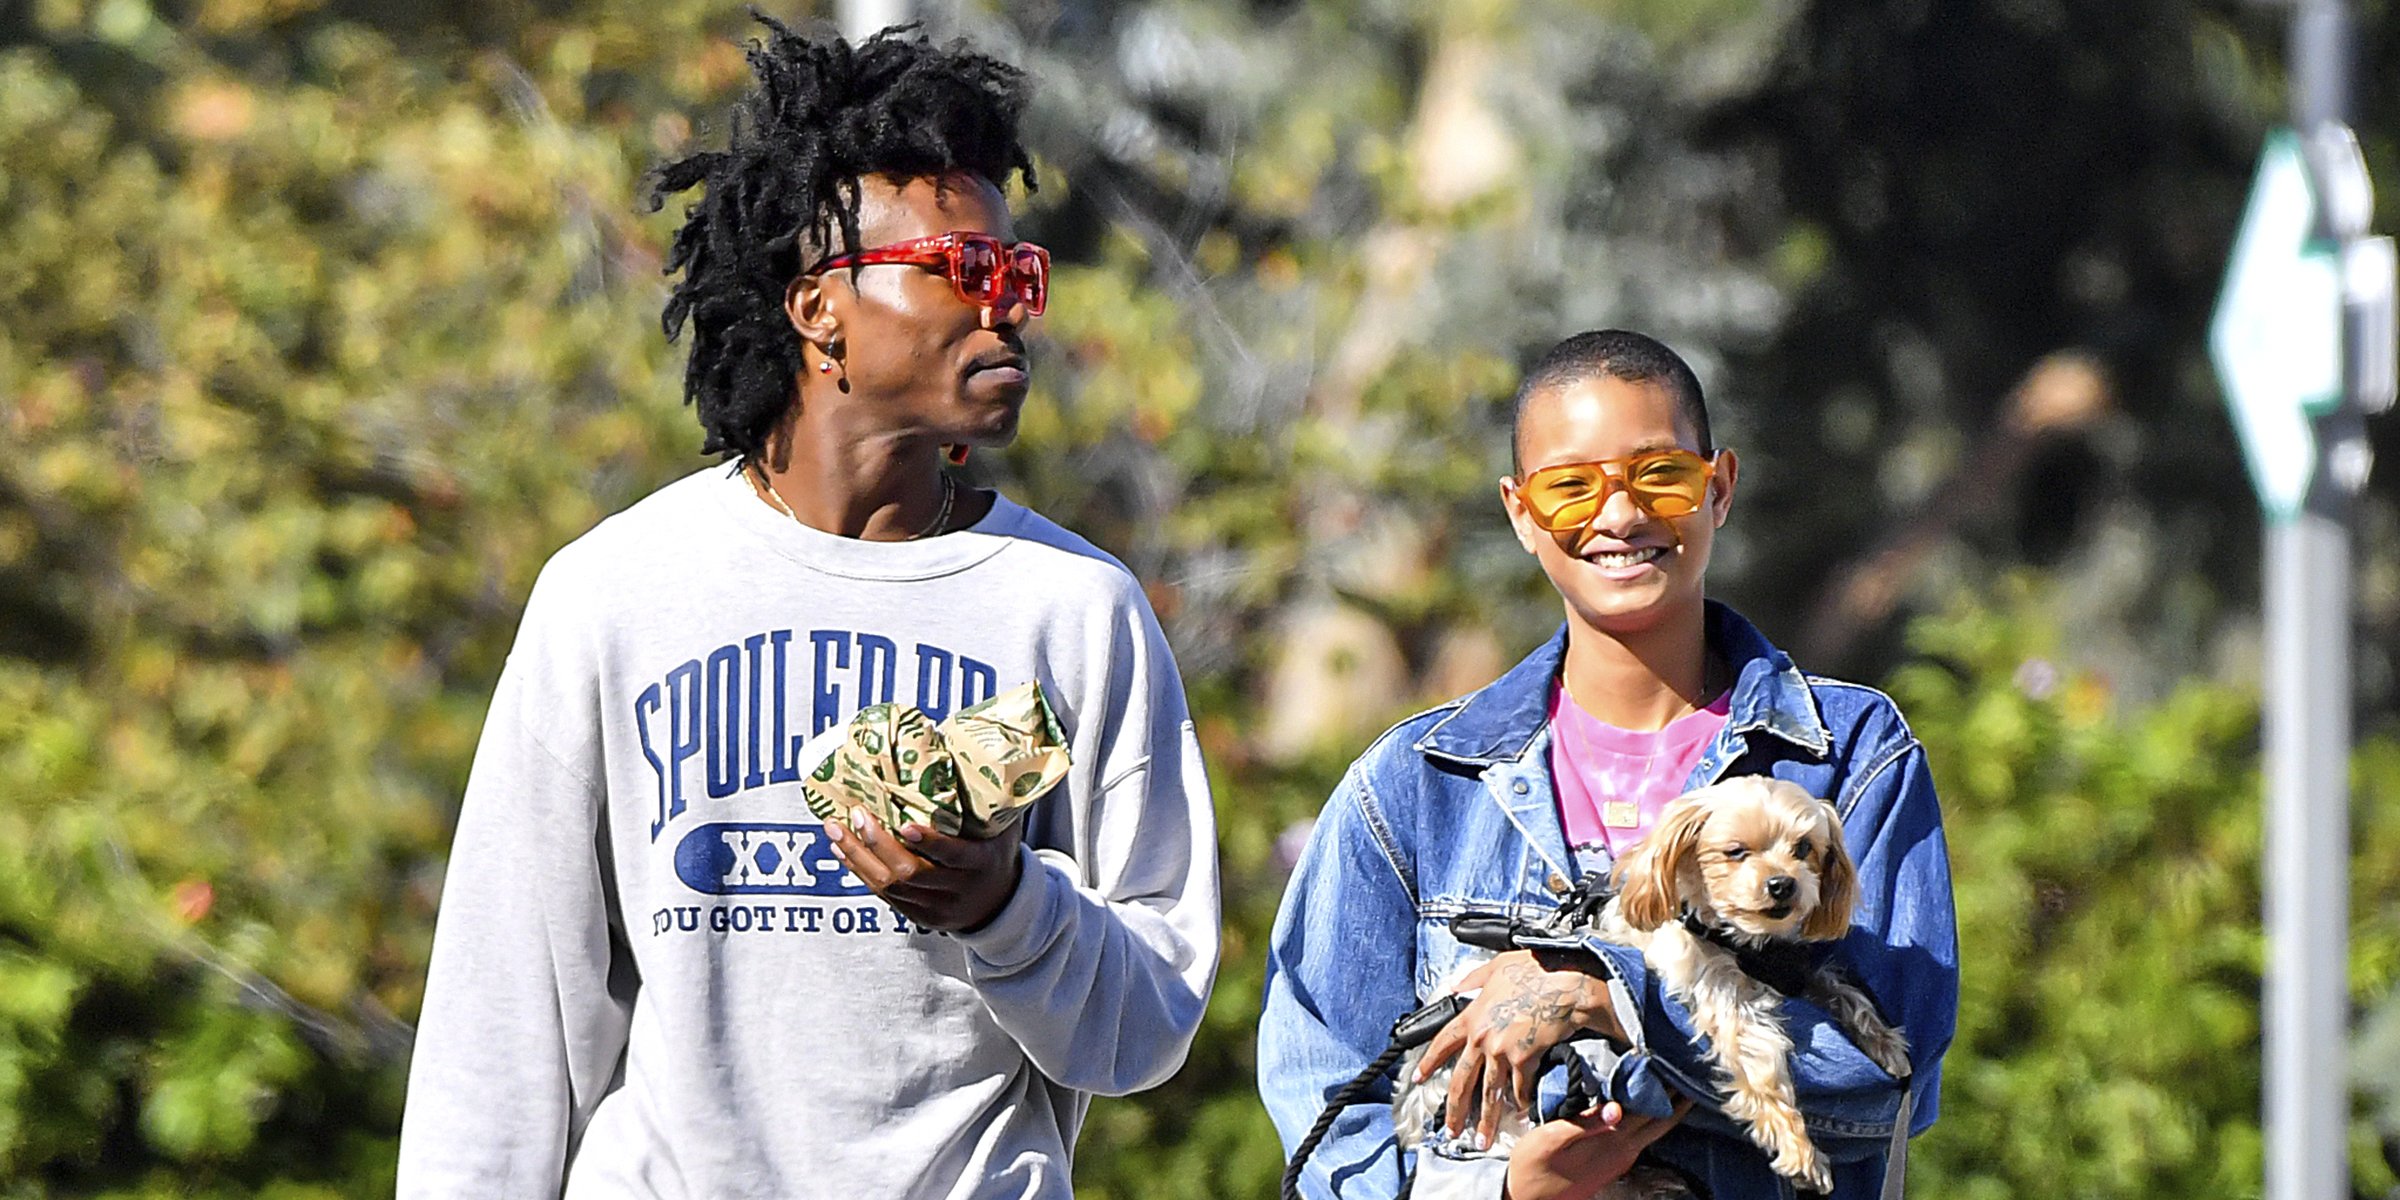 De'Wayne Jackson and Willow Smith are seen on September 26, 2022 in Los Angeles, California | Source: Getty Images